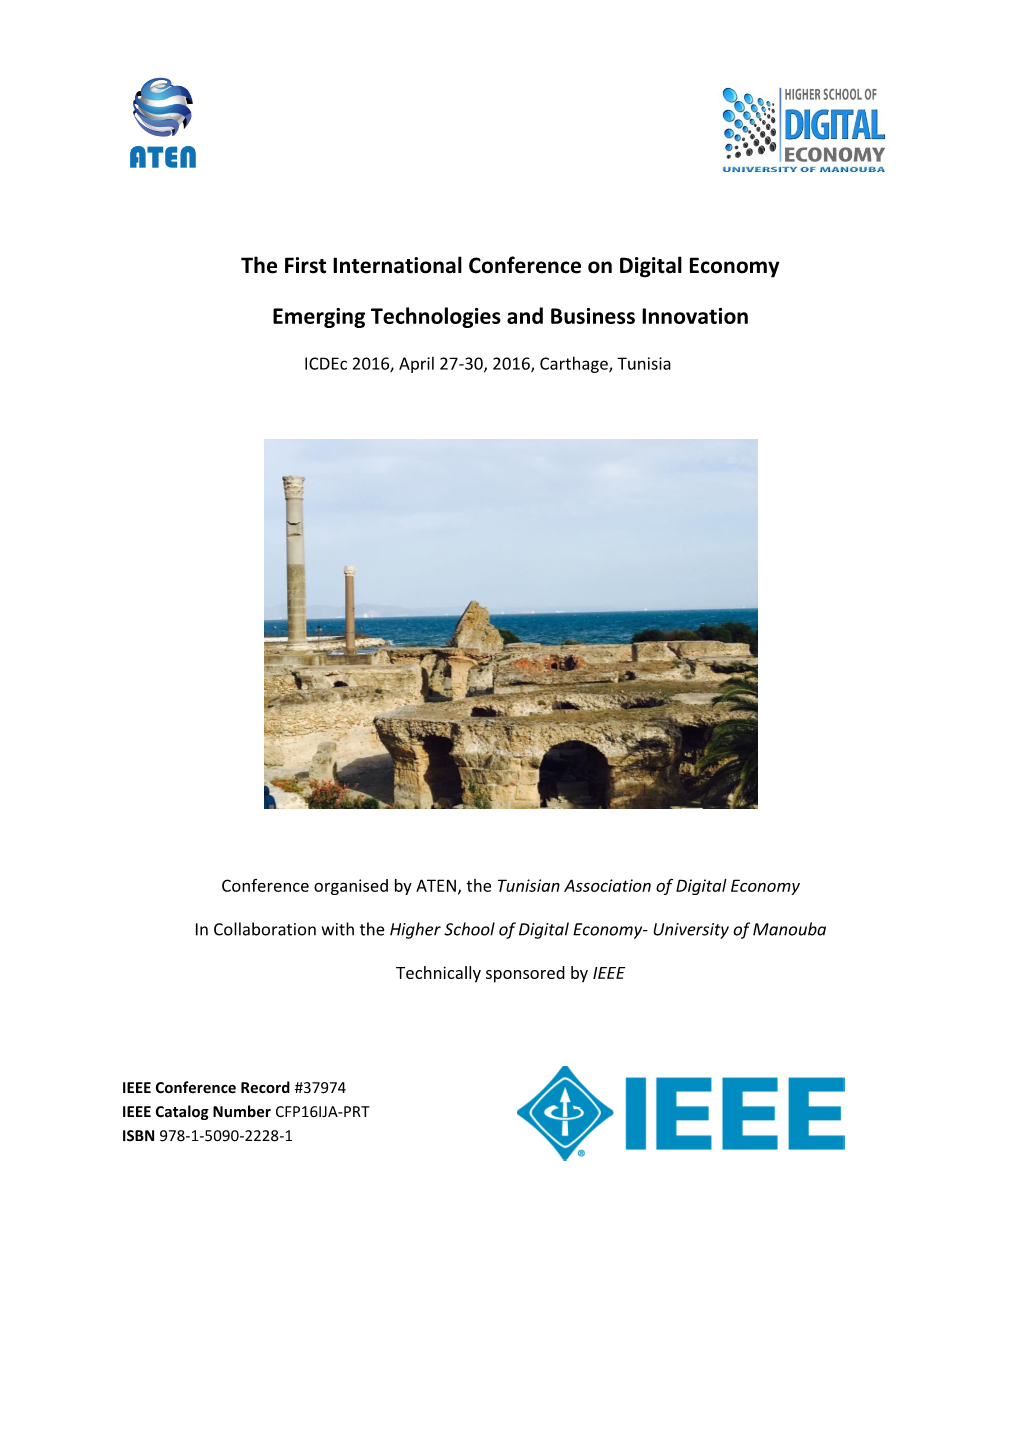 The First International Conference on Digital Economy Emerging